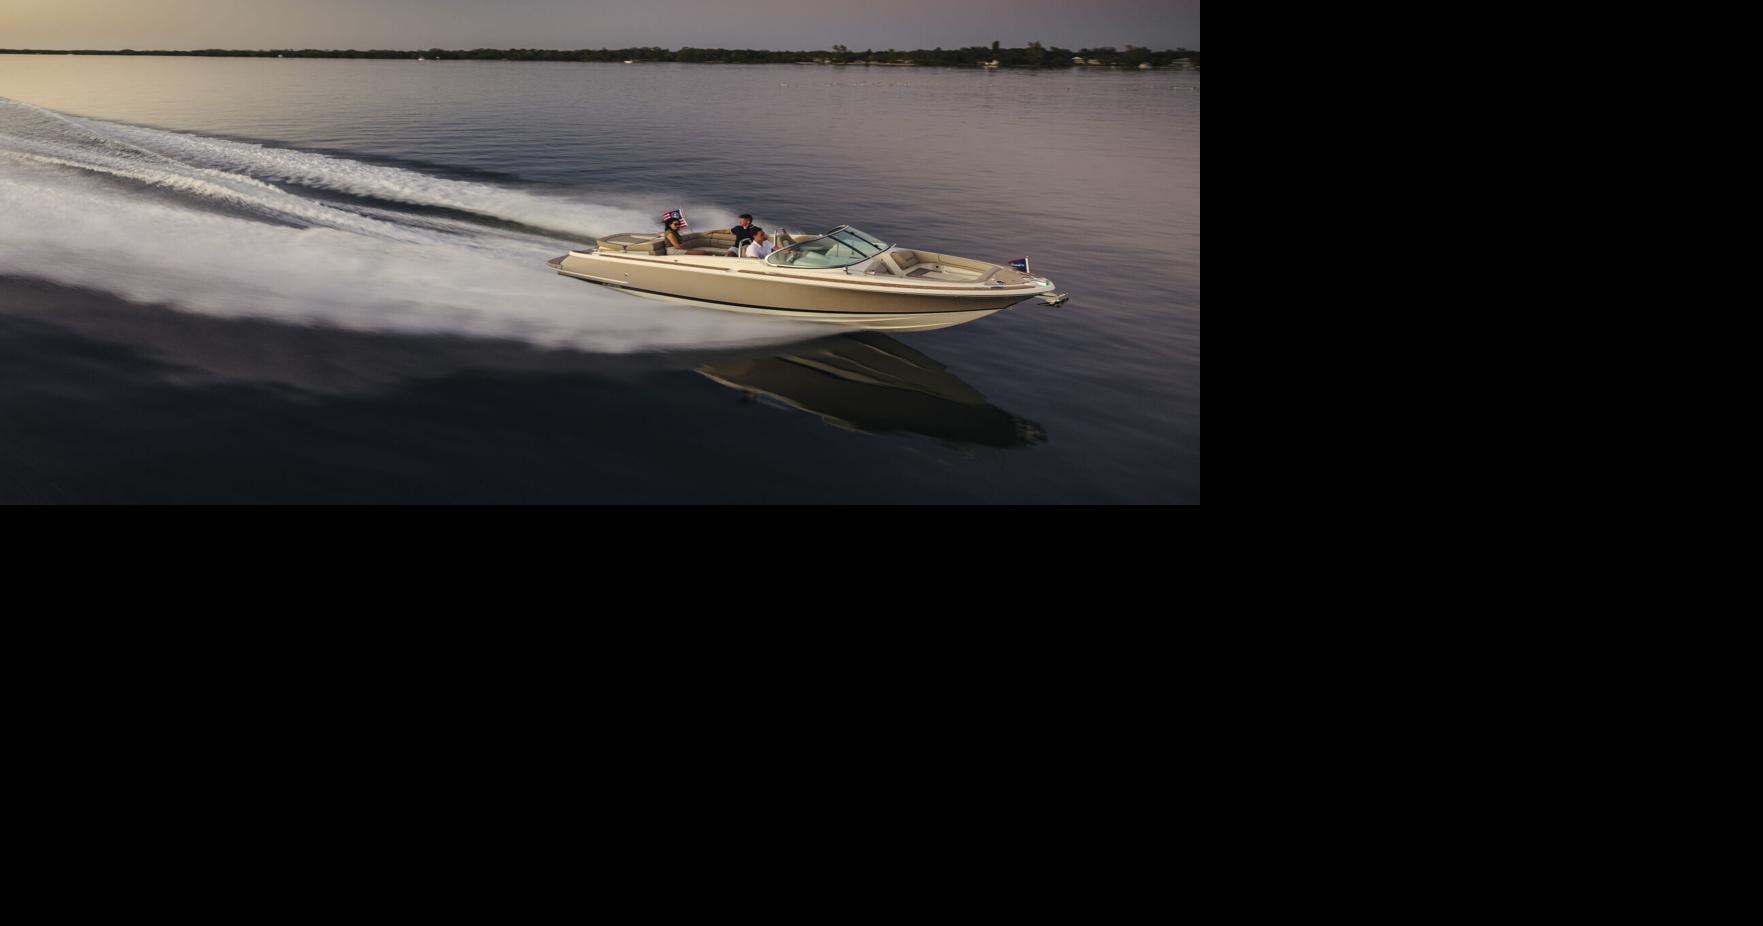 Winnebago Industries’ subsidiary Chris-Craft introduces new Sportster 25